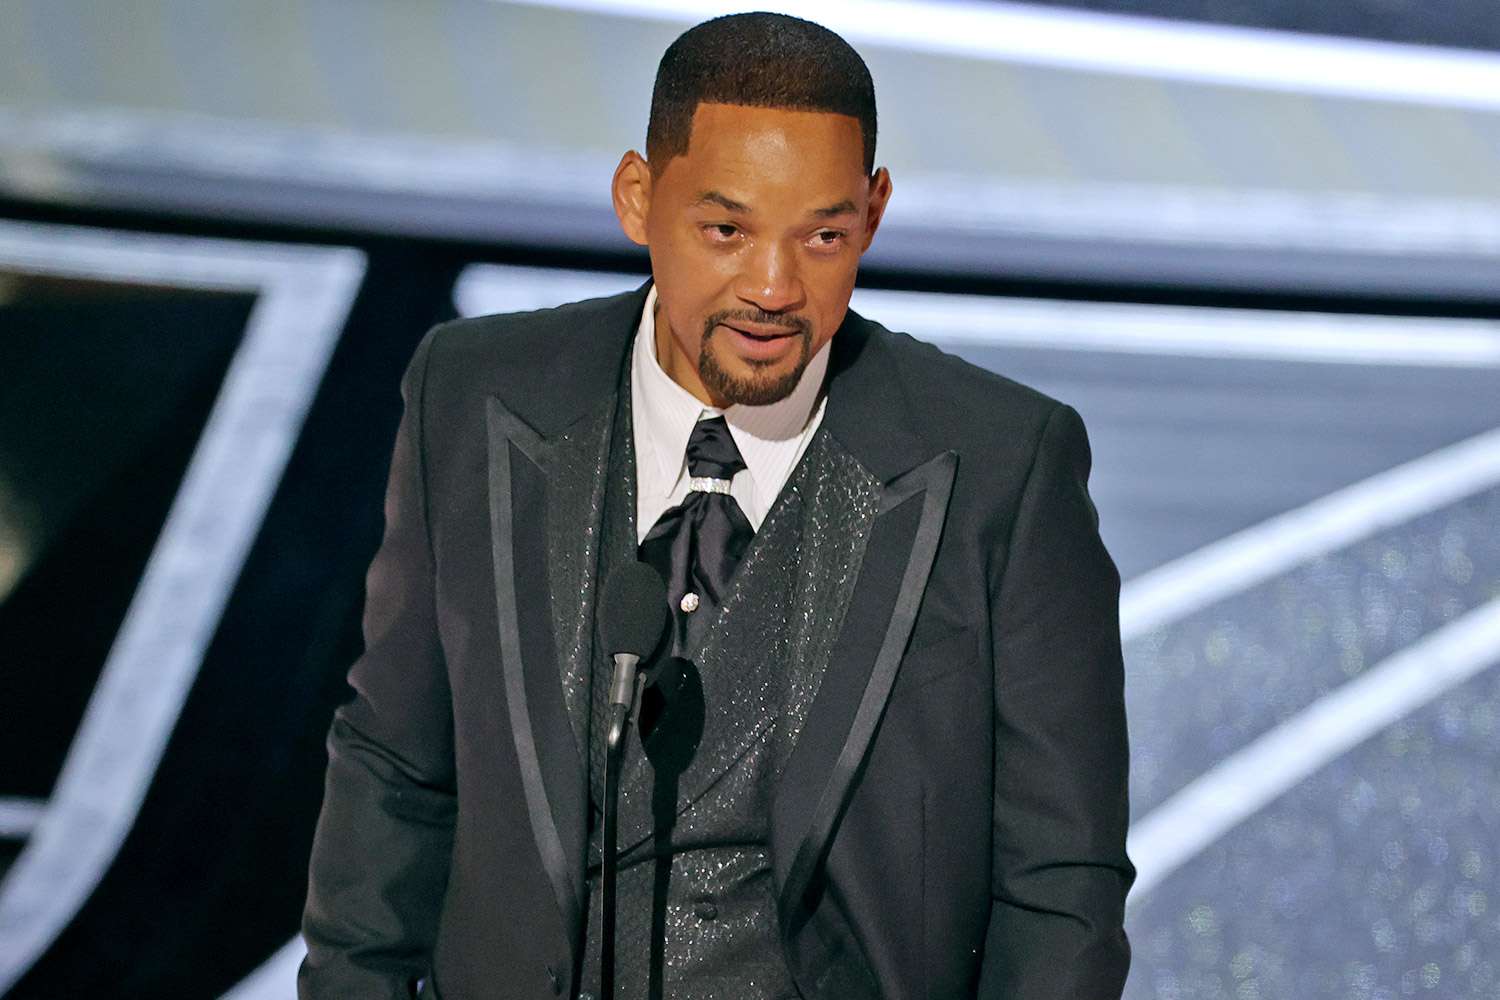 Will Smith's first major film post-Oscars slap, 'Emancipation,' earns praise at special screening - Entertainment Weekly News